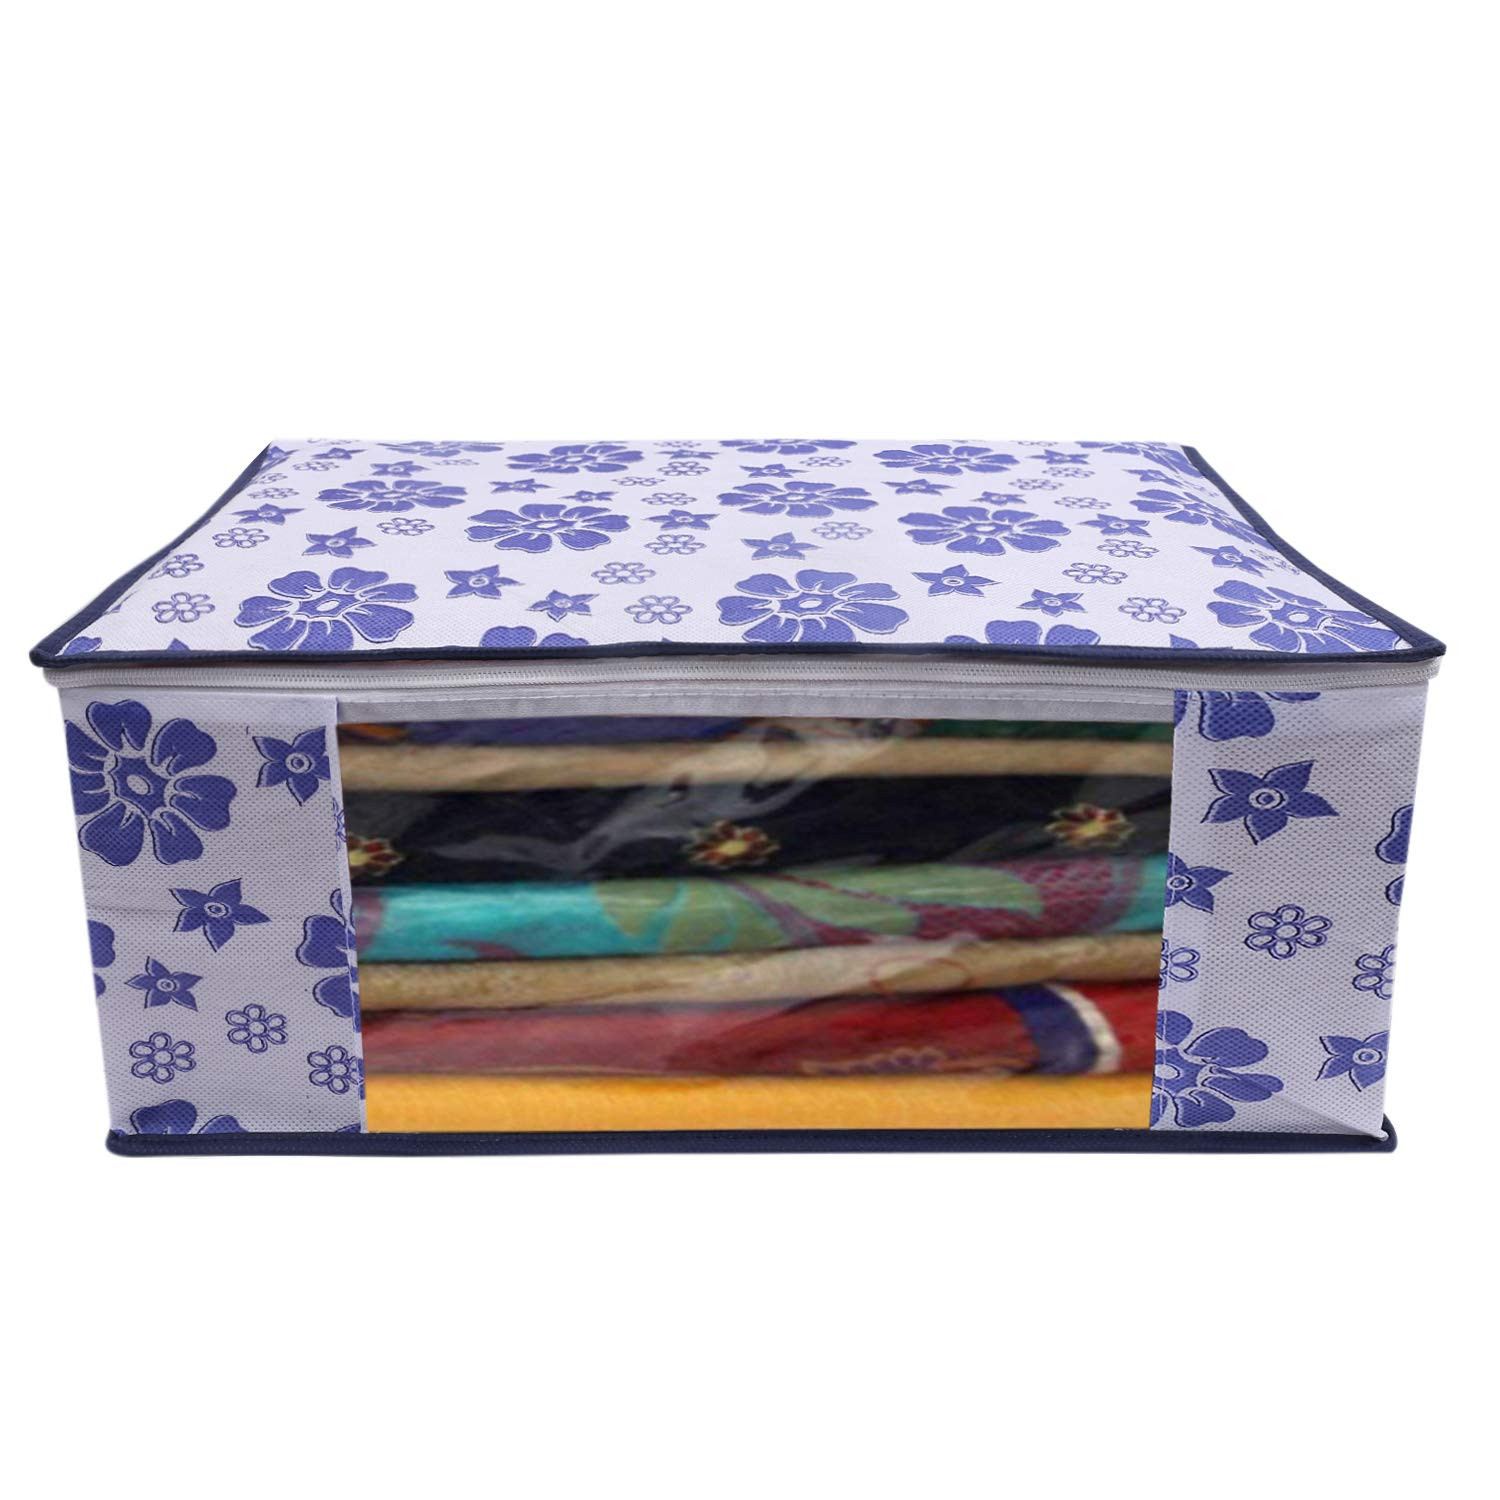 Kuber Industries Flower Printed Non Woven Fabric Saree Cover Set with Transparent Window, Extra Large, Pink & Blue & Ivory Red -CTKTC40803